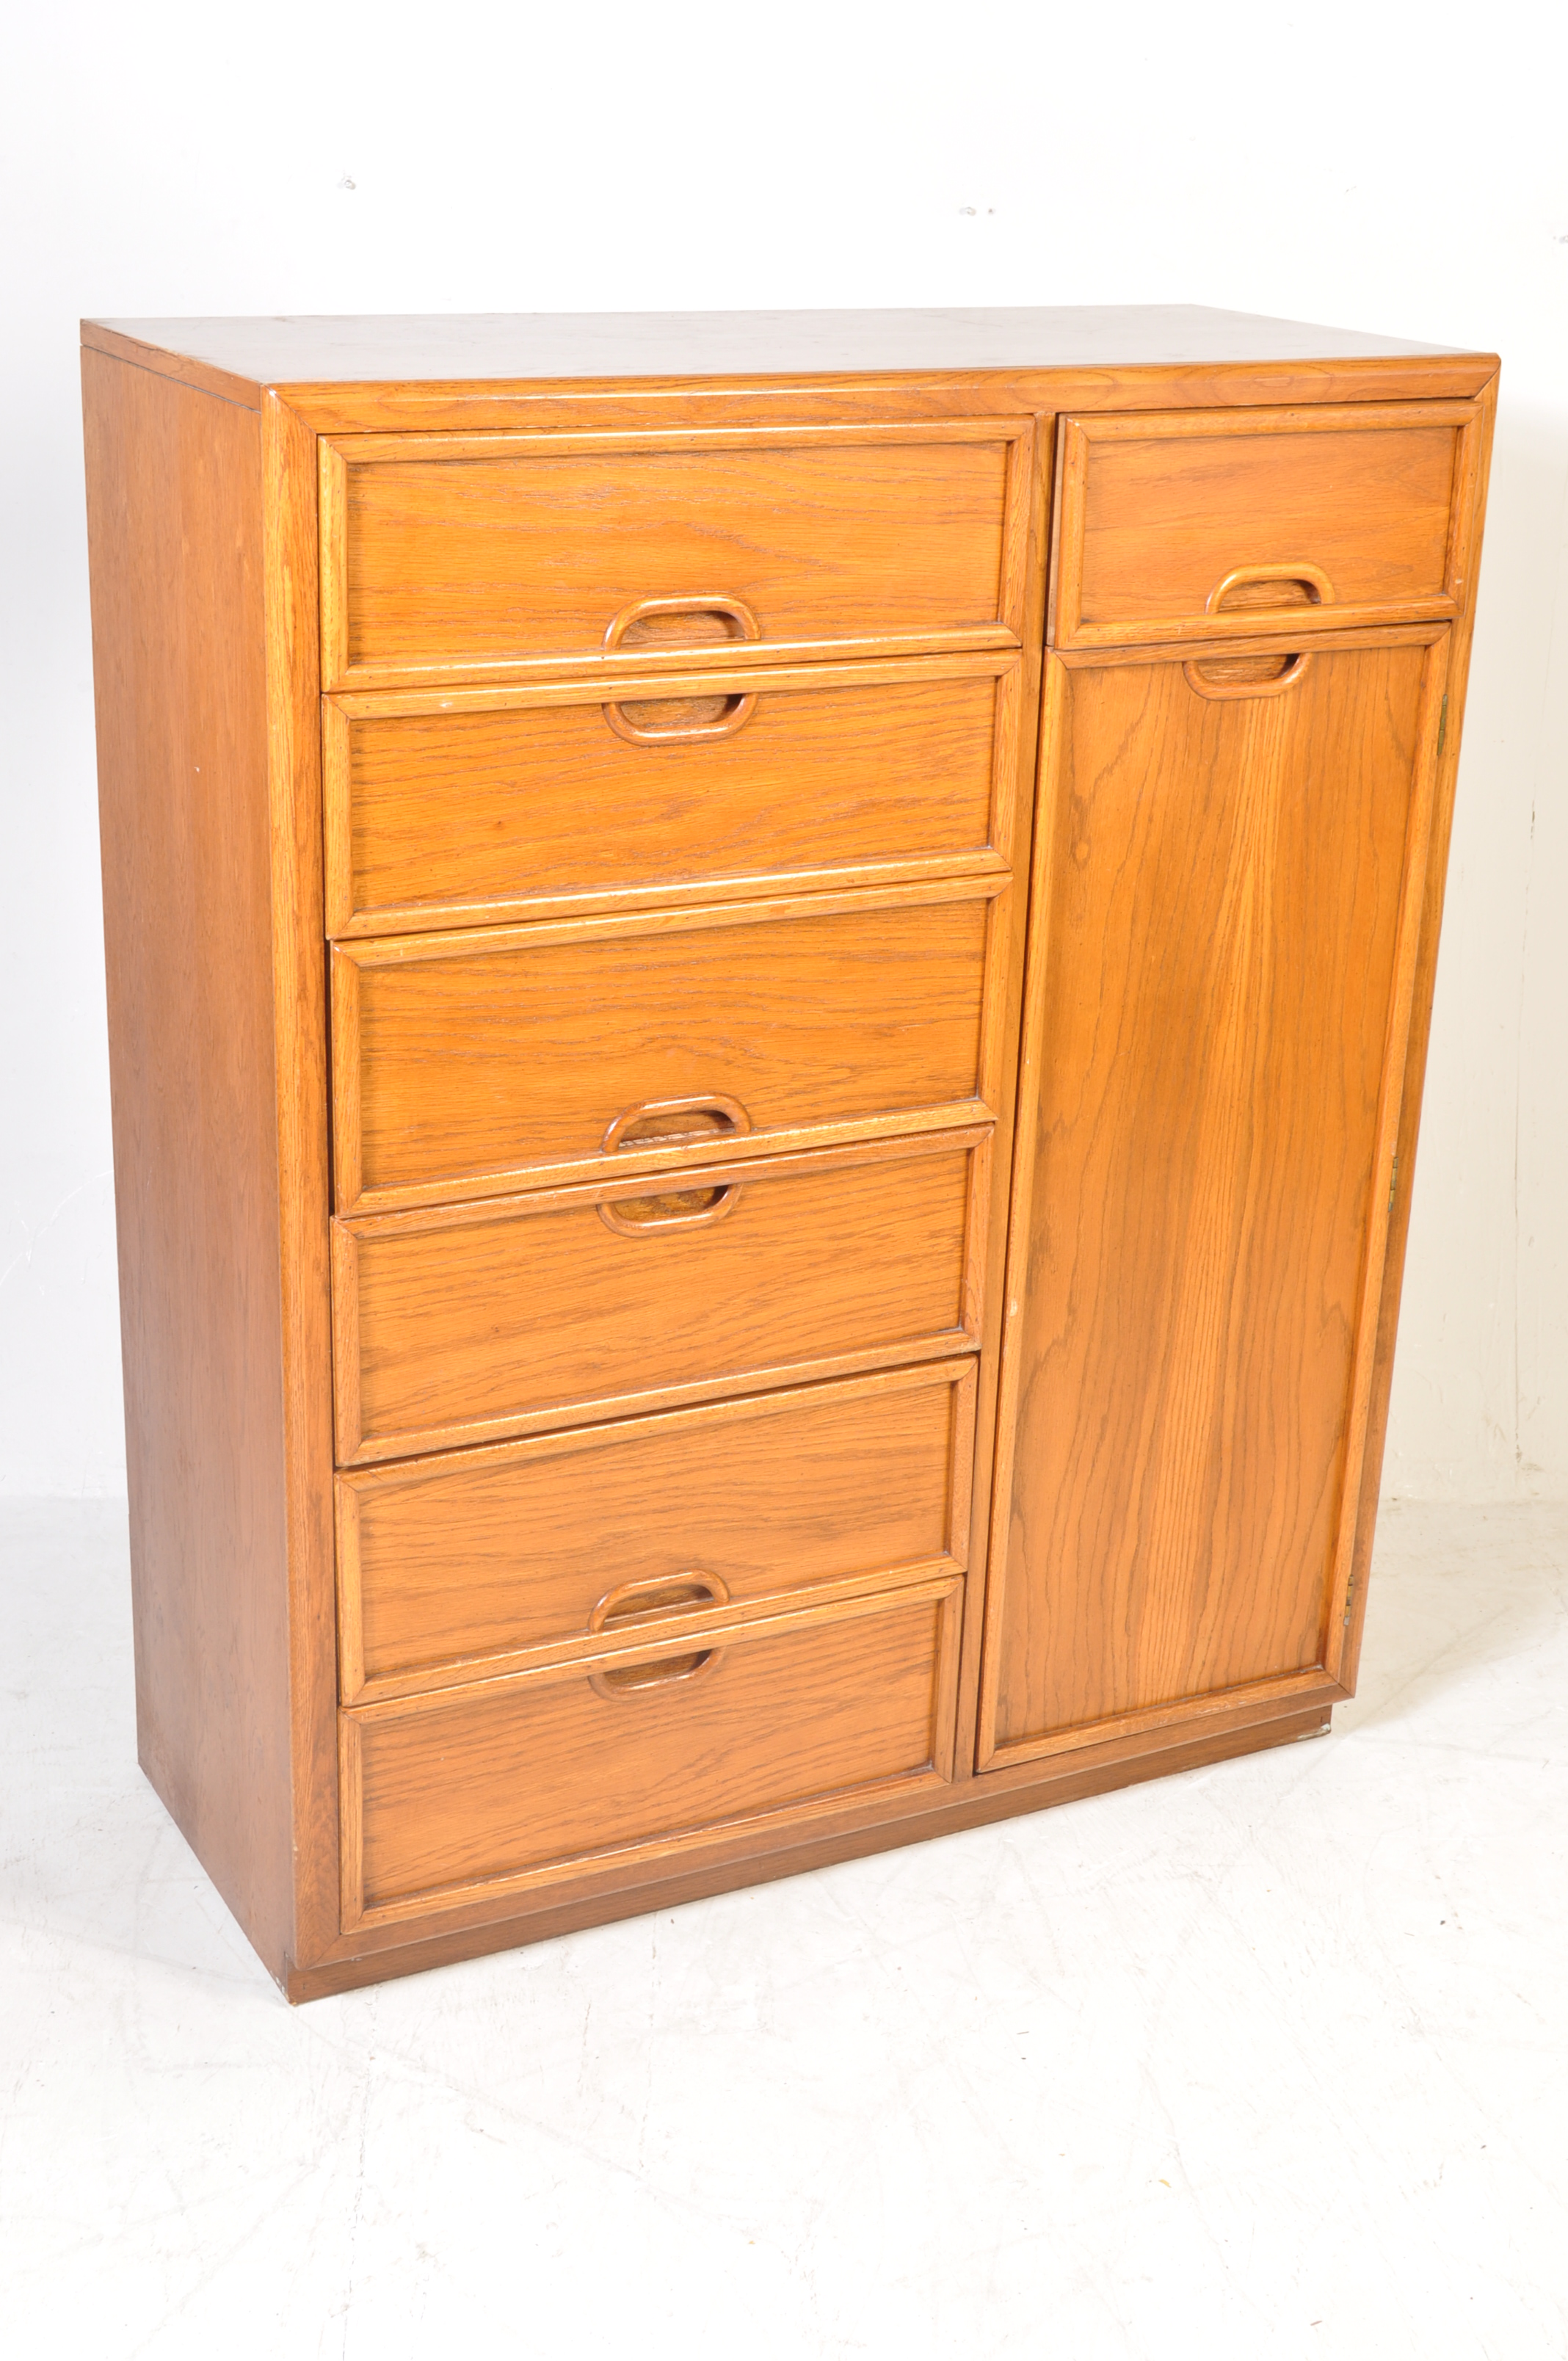 VINTAGE 20TH CENTURY TEAK CHEST OF DRAWERS - Image 2 of 7